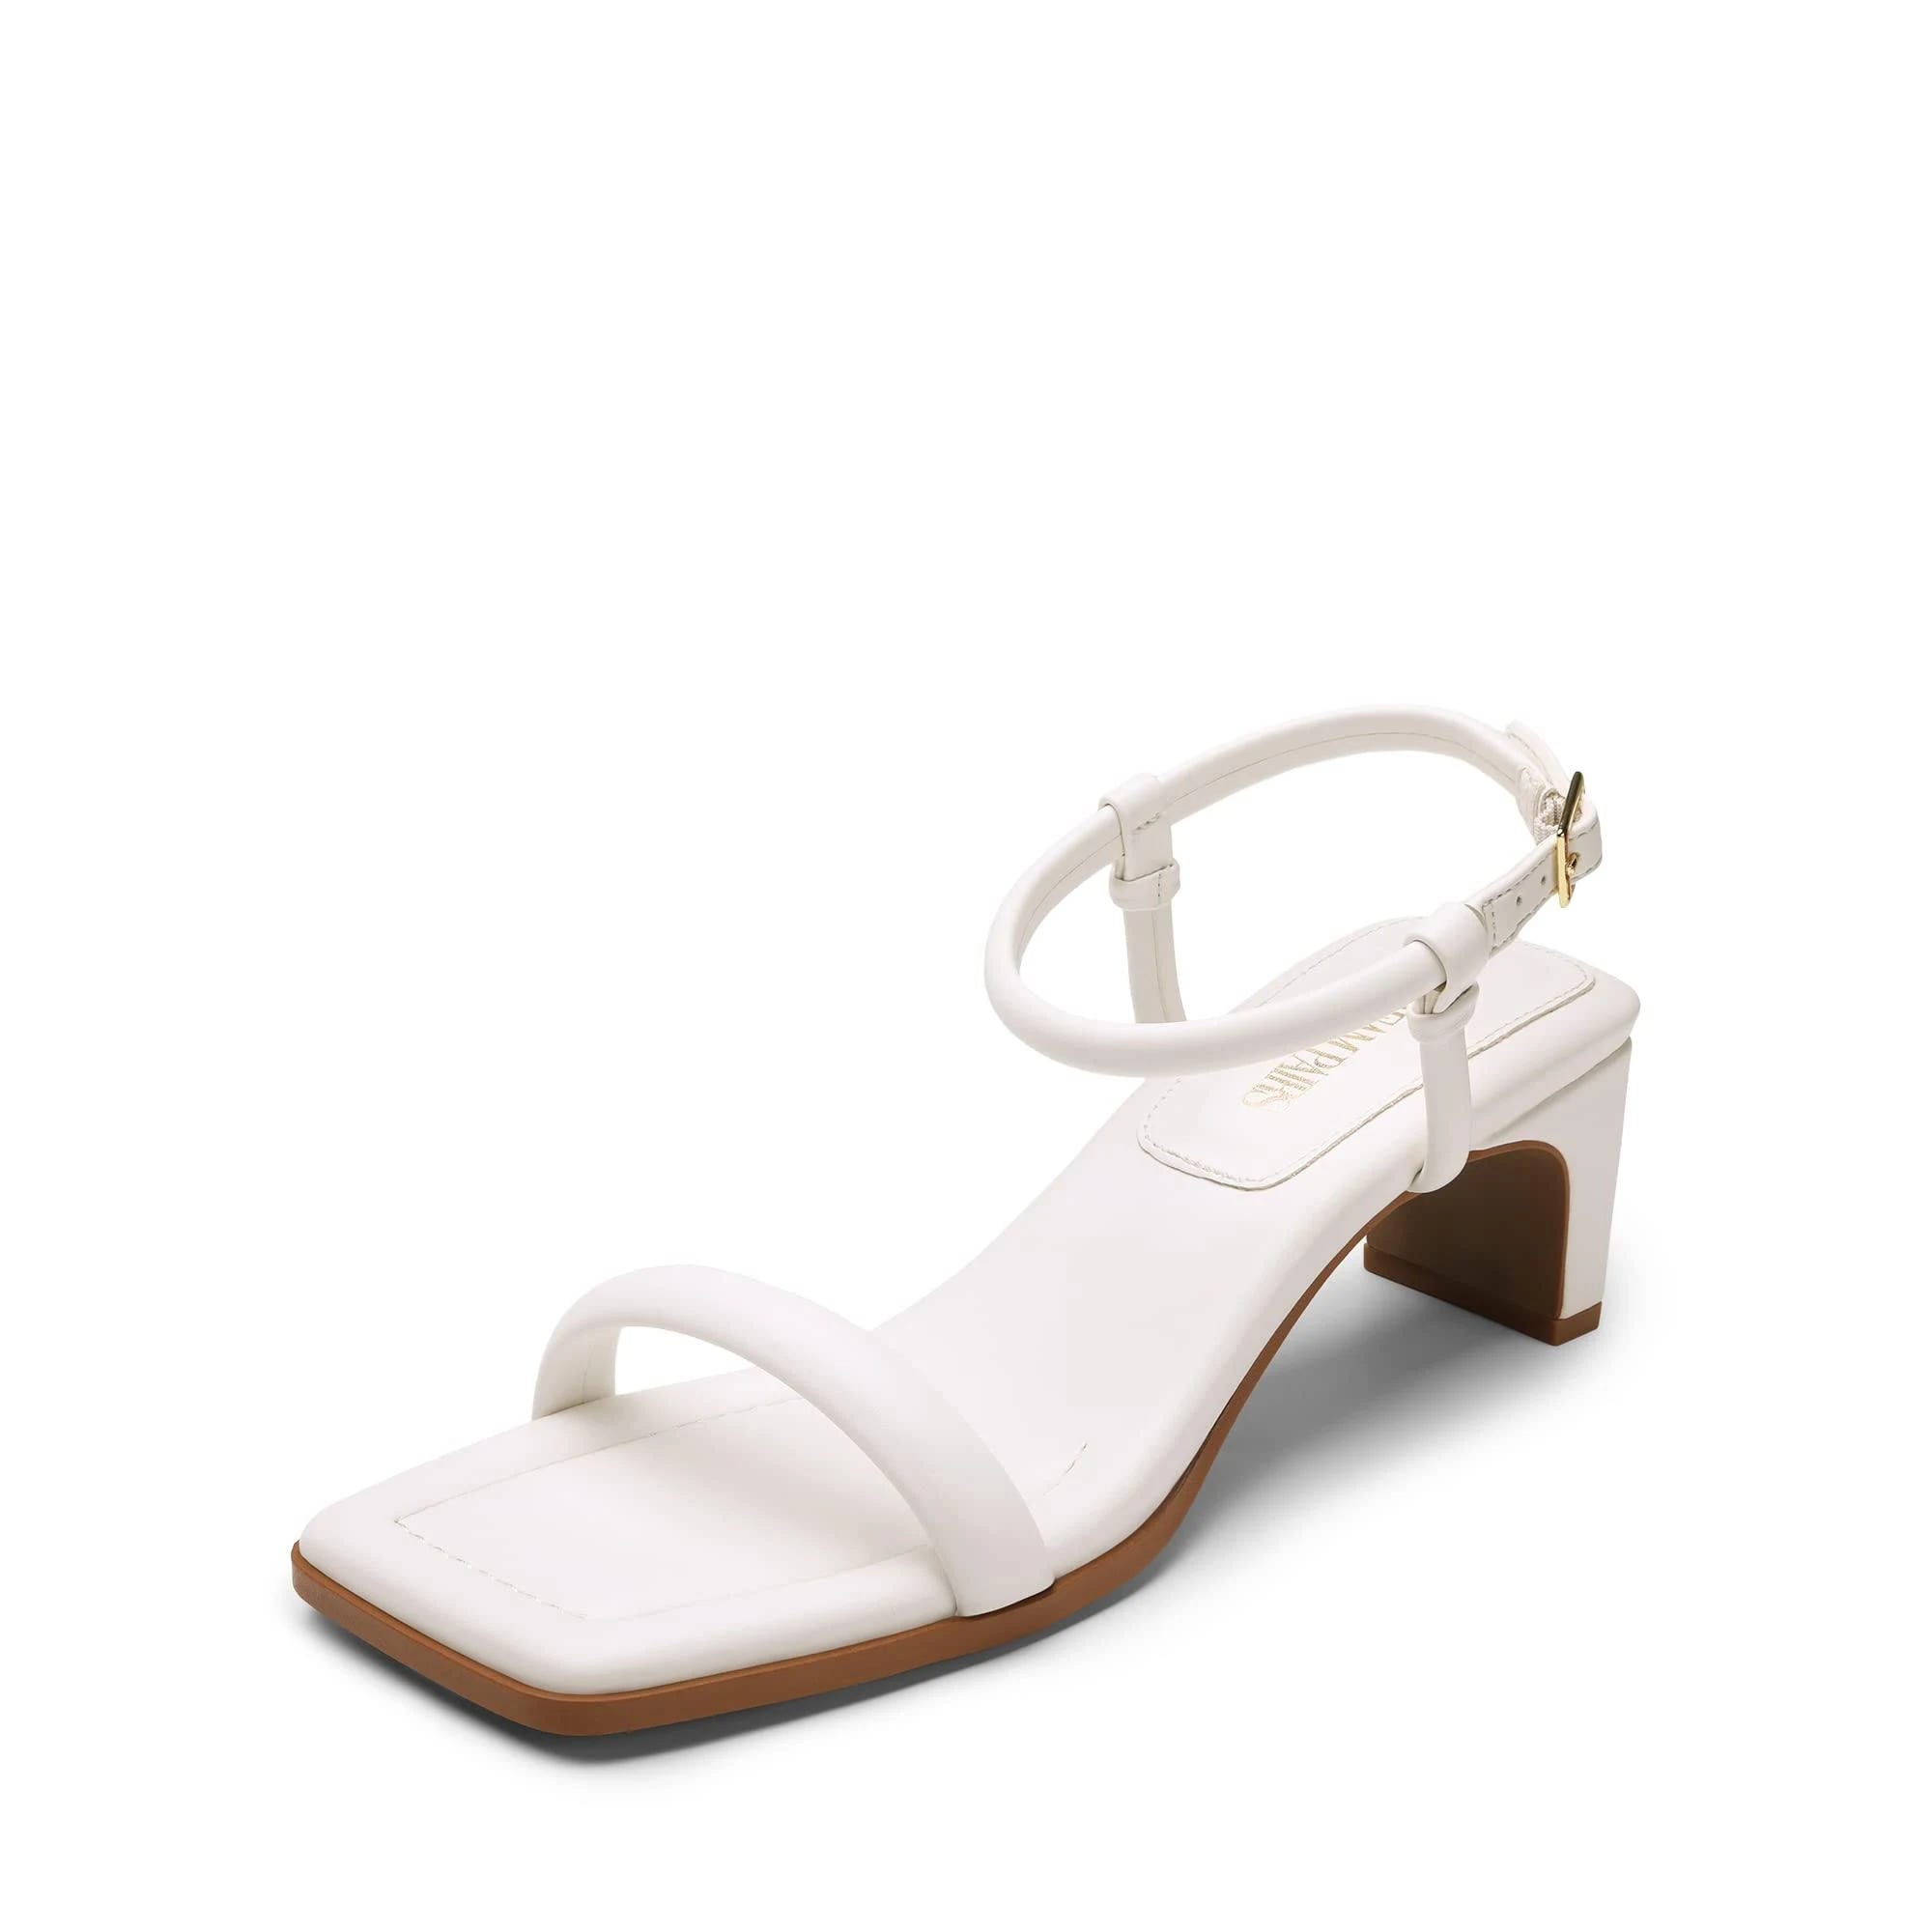 Stylish Ankle Strap Heeled Sandals with Soft Comfort | Image